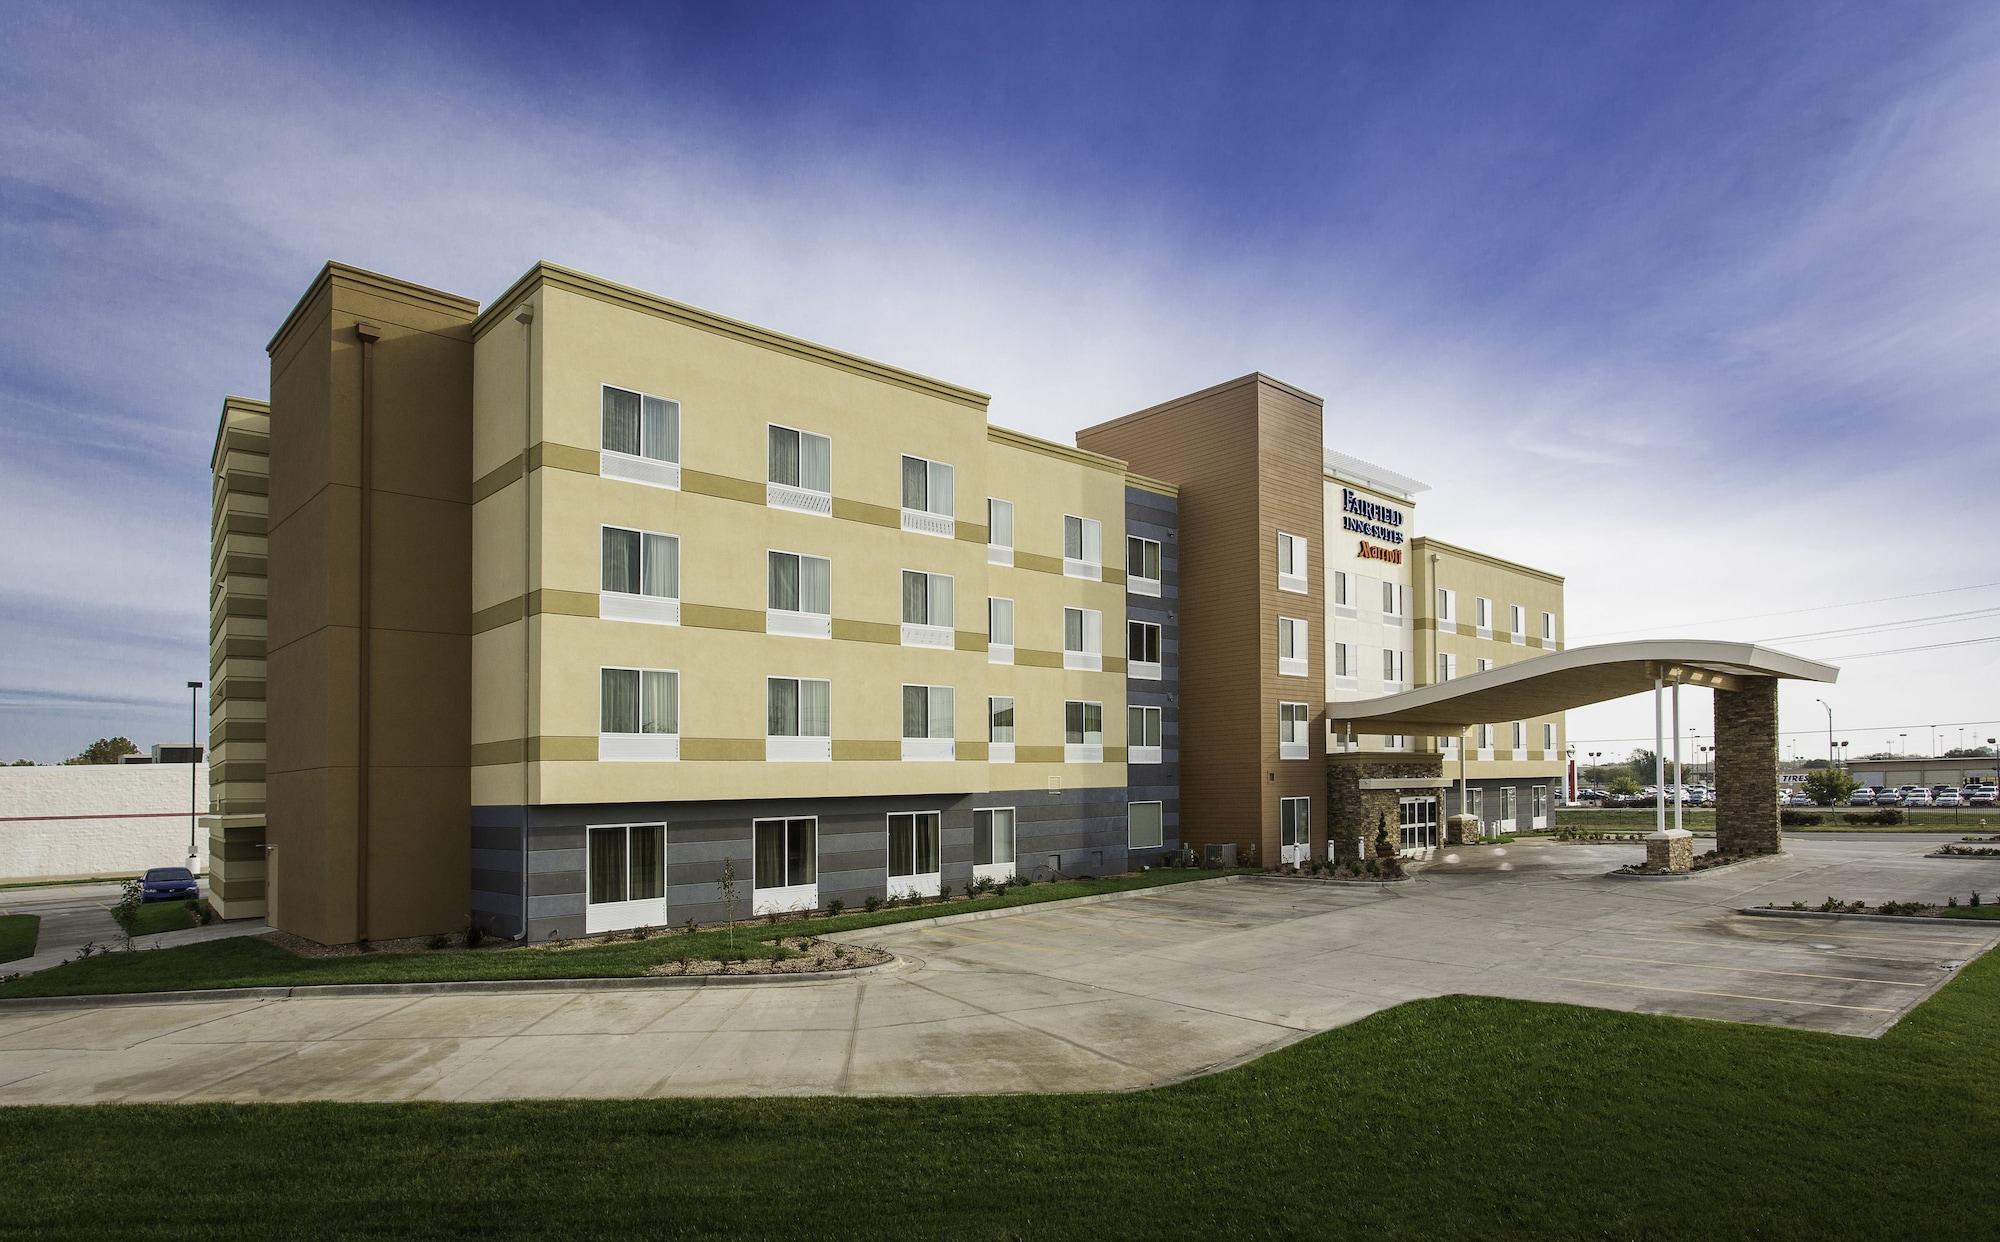 Fairfield Inn & Suites by Marriott Chillicothe image